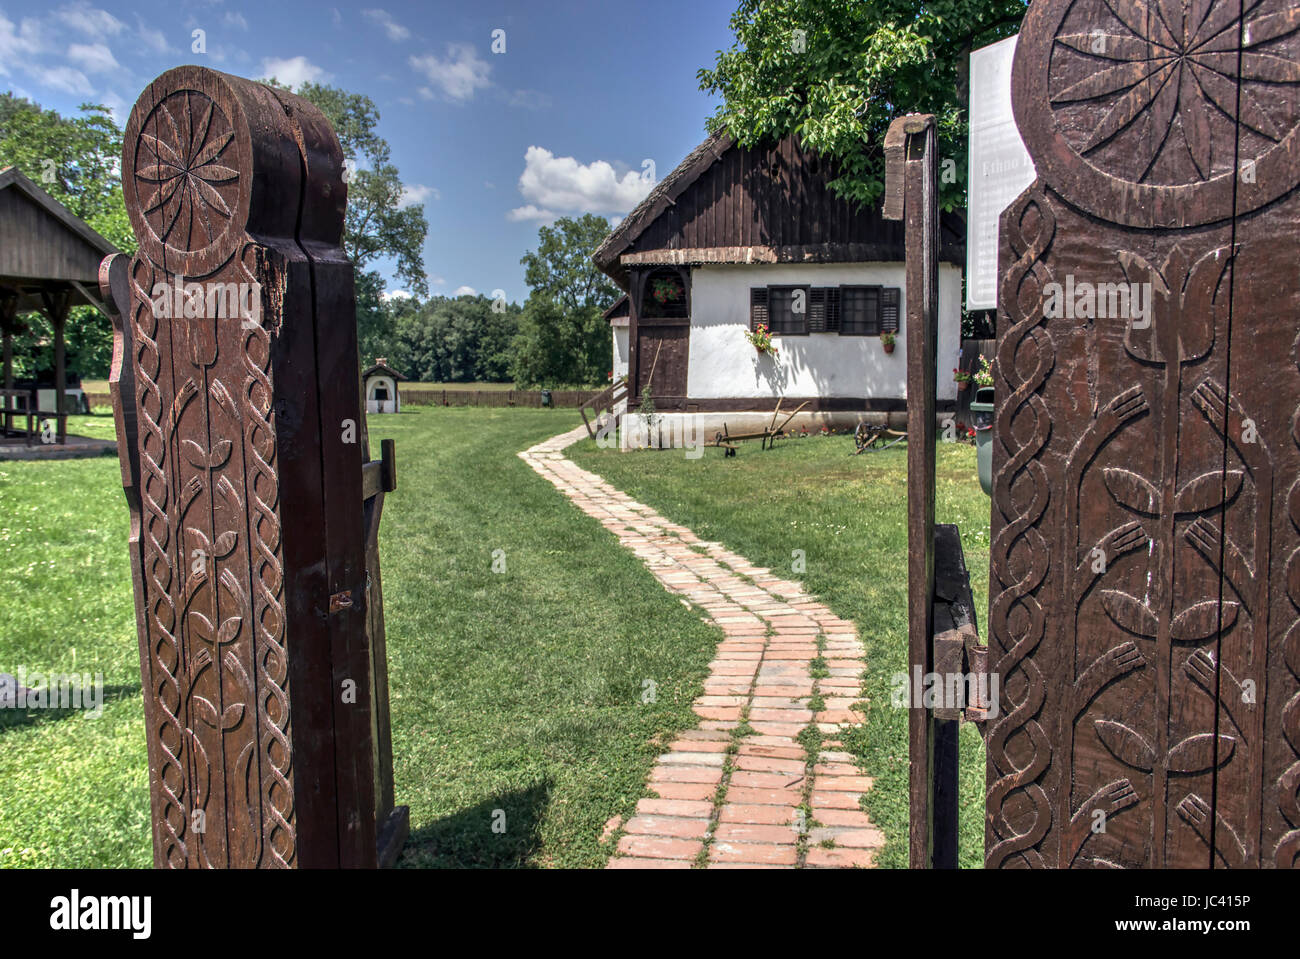 Countryside, Serbia - The gate of the traditional village house yard Stock Photo